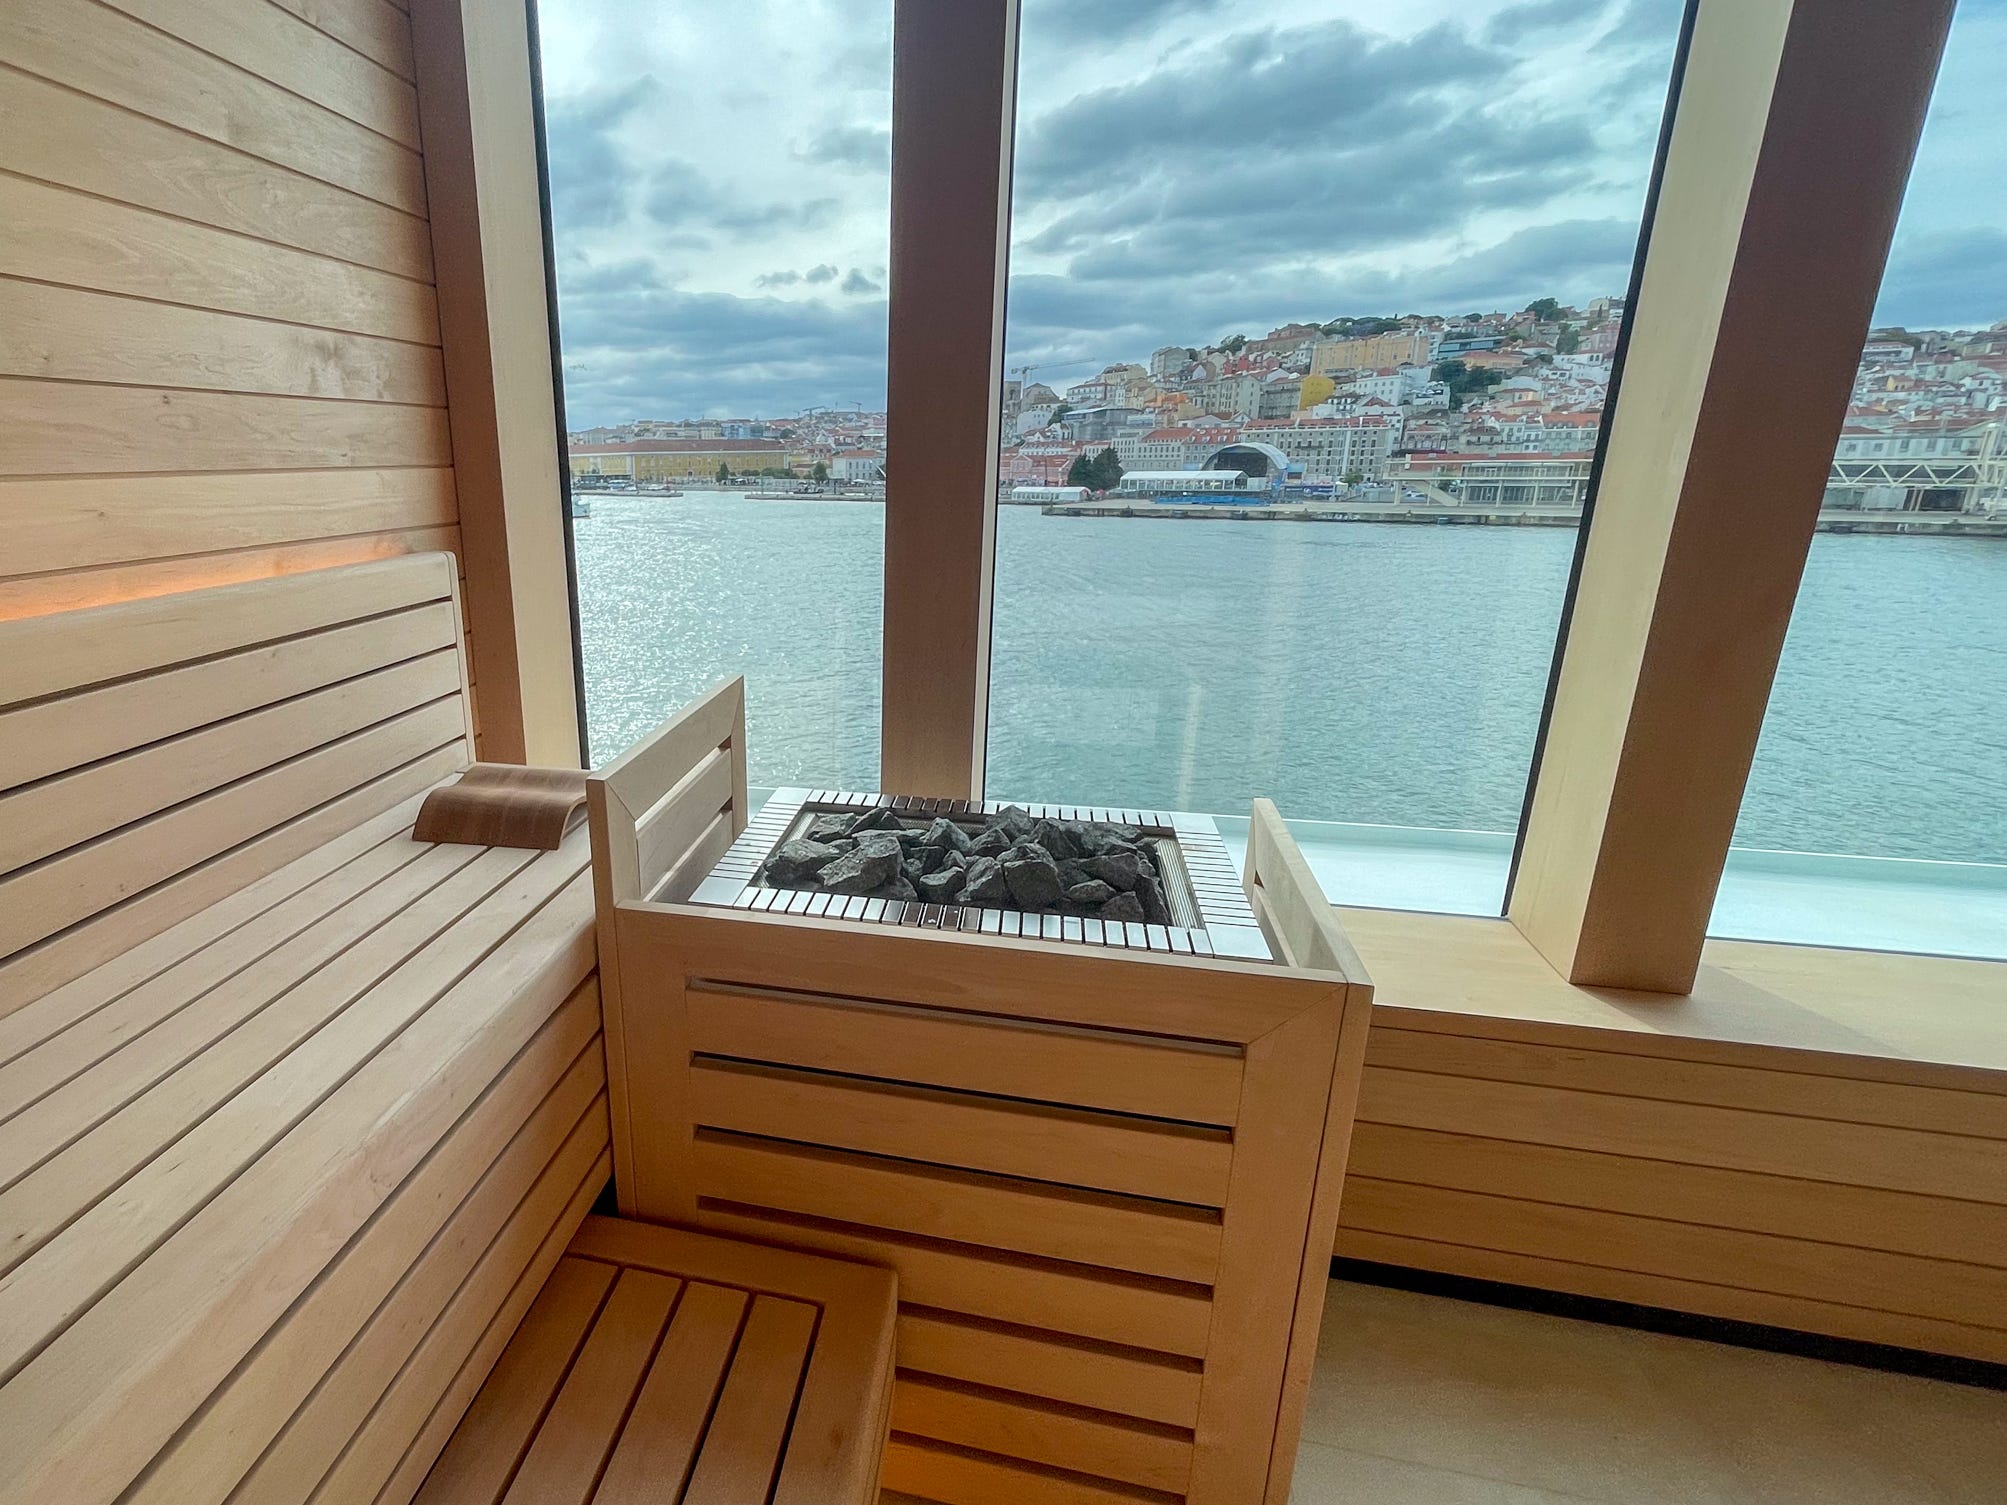 <p>Access to spa facilities like saunas is often complimentary on <a href="https://www.businessinsider.com/review-ultra-luxury-cruise-wealthy-travelers-regent-seven-seas-2023-12">high-end cruises</a>.</p><p>Silver Ray's was admittedly bare-boned, with only three rooms (a steam room, sauna, and thermal pool). But you'll quickly forget about the lack of options when you see the ocean views inside the pool and sauna.</p><p>The latter is a great place to balance your yin (peacefully staring at the passing waves) with your yang (feeling like you're about to have a heat stroke).</p><p>Unfortunately, the steam room doesn't have any views. However, it does offer complimentary scented scrubs that will leave you with baby-soft skin.</p>